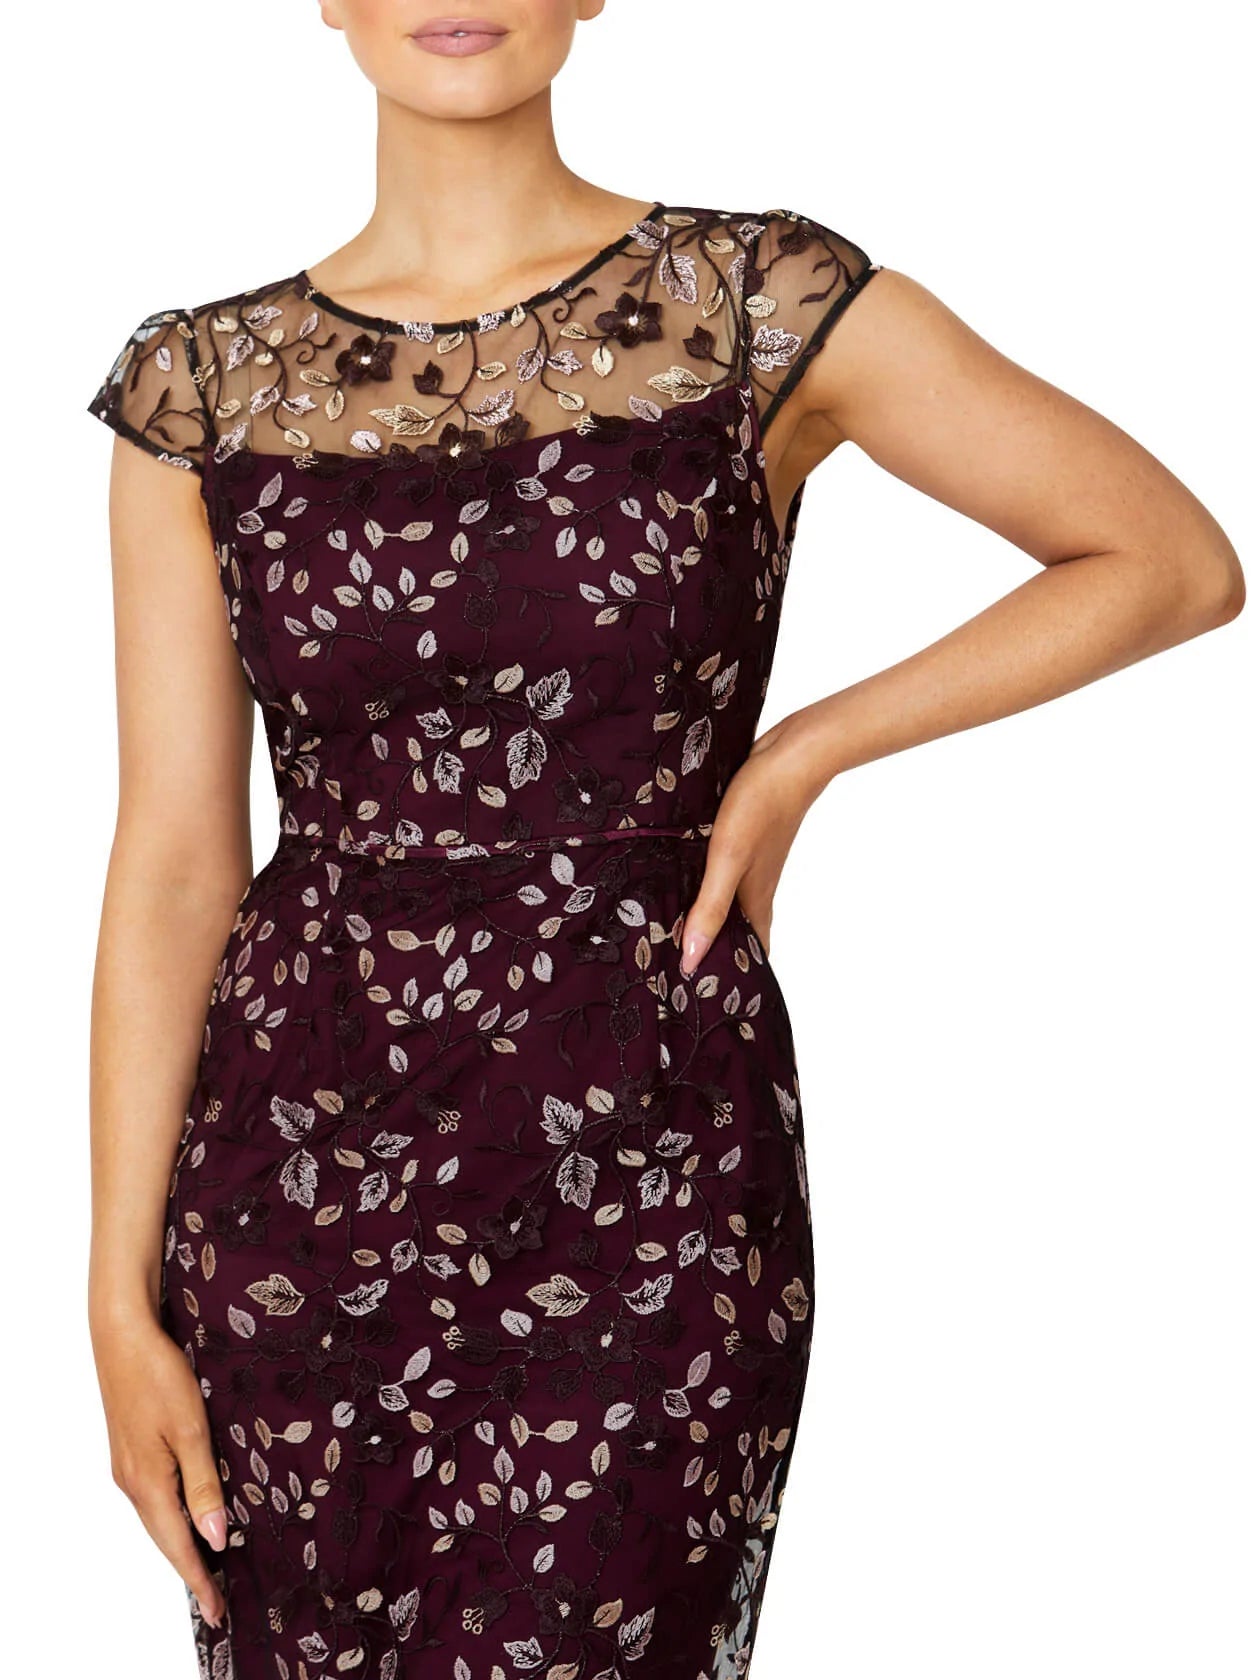 Floral Embroidered Mesh Dress SD16412 - After Hours Boutique